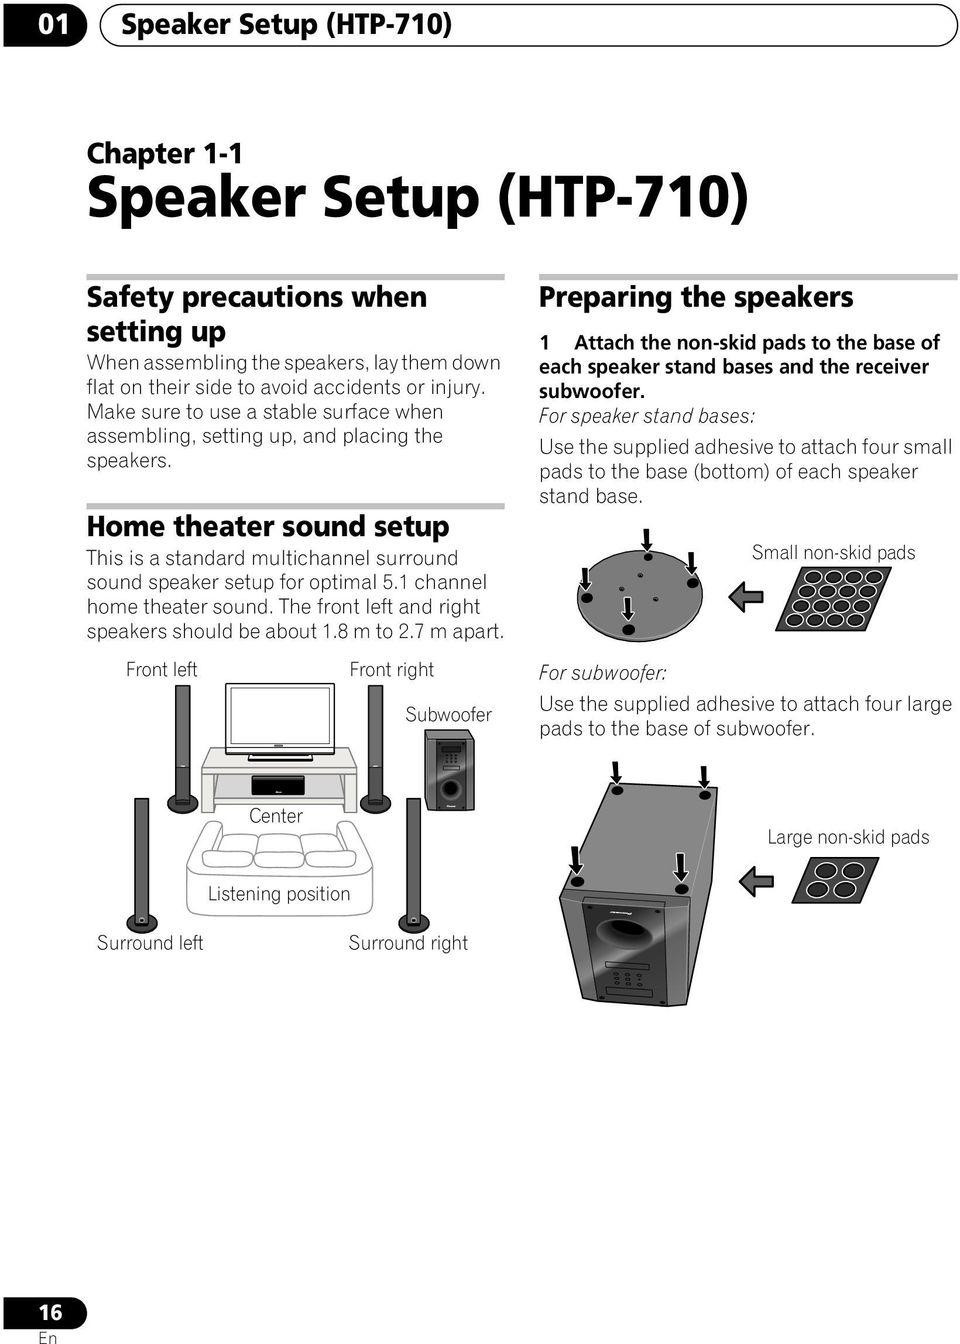 1 channel home theater sound. The front left and right speakers should be about 1.8 m to 2.7 m apart.